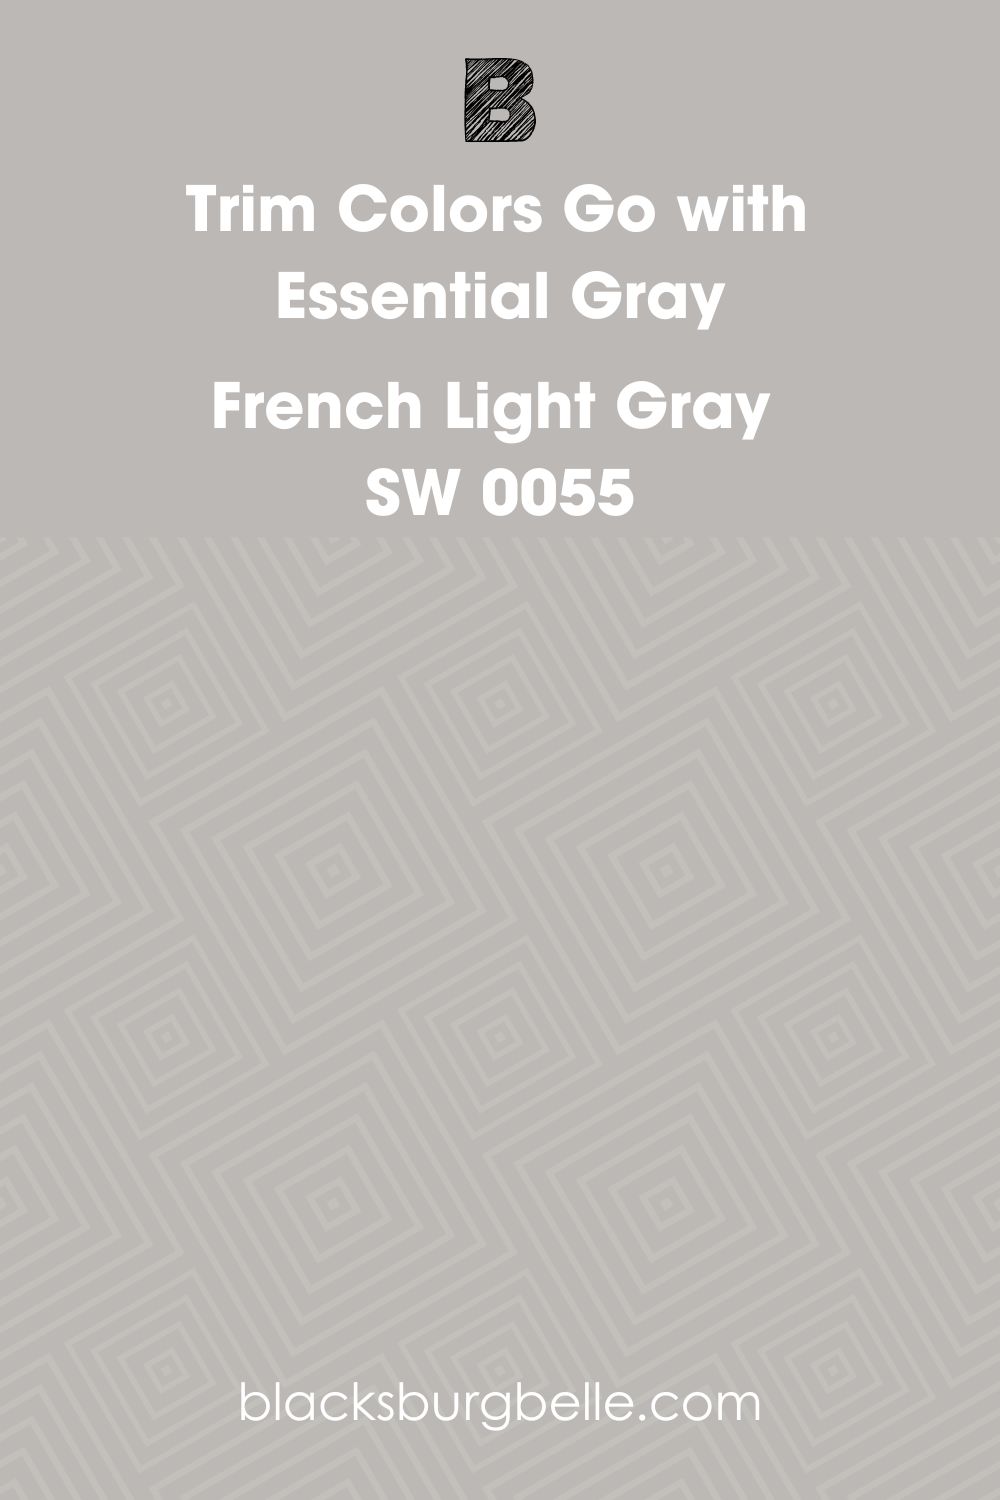 French Light Gray SW 0055 Go with Sherwin Williams Essential Gray